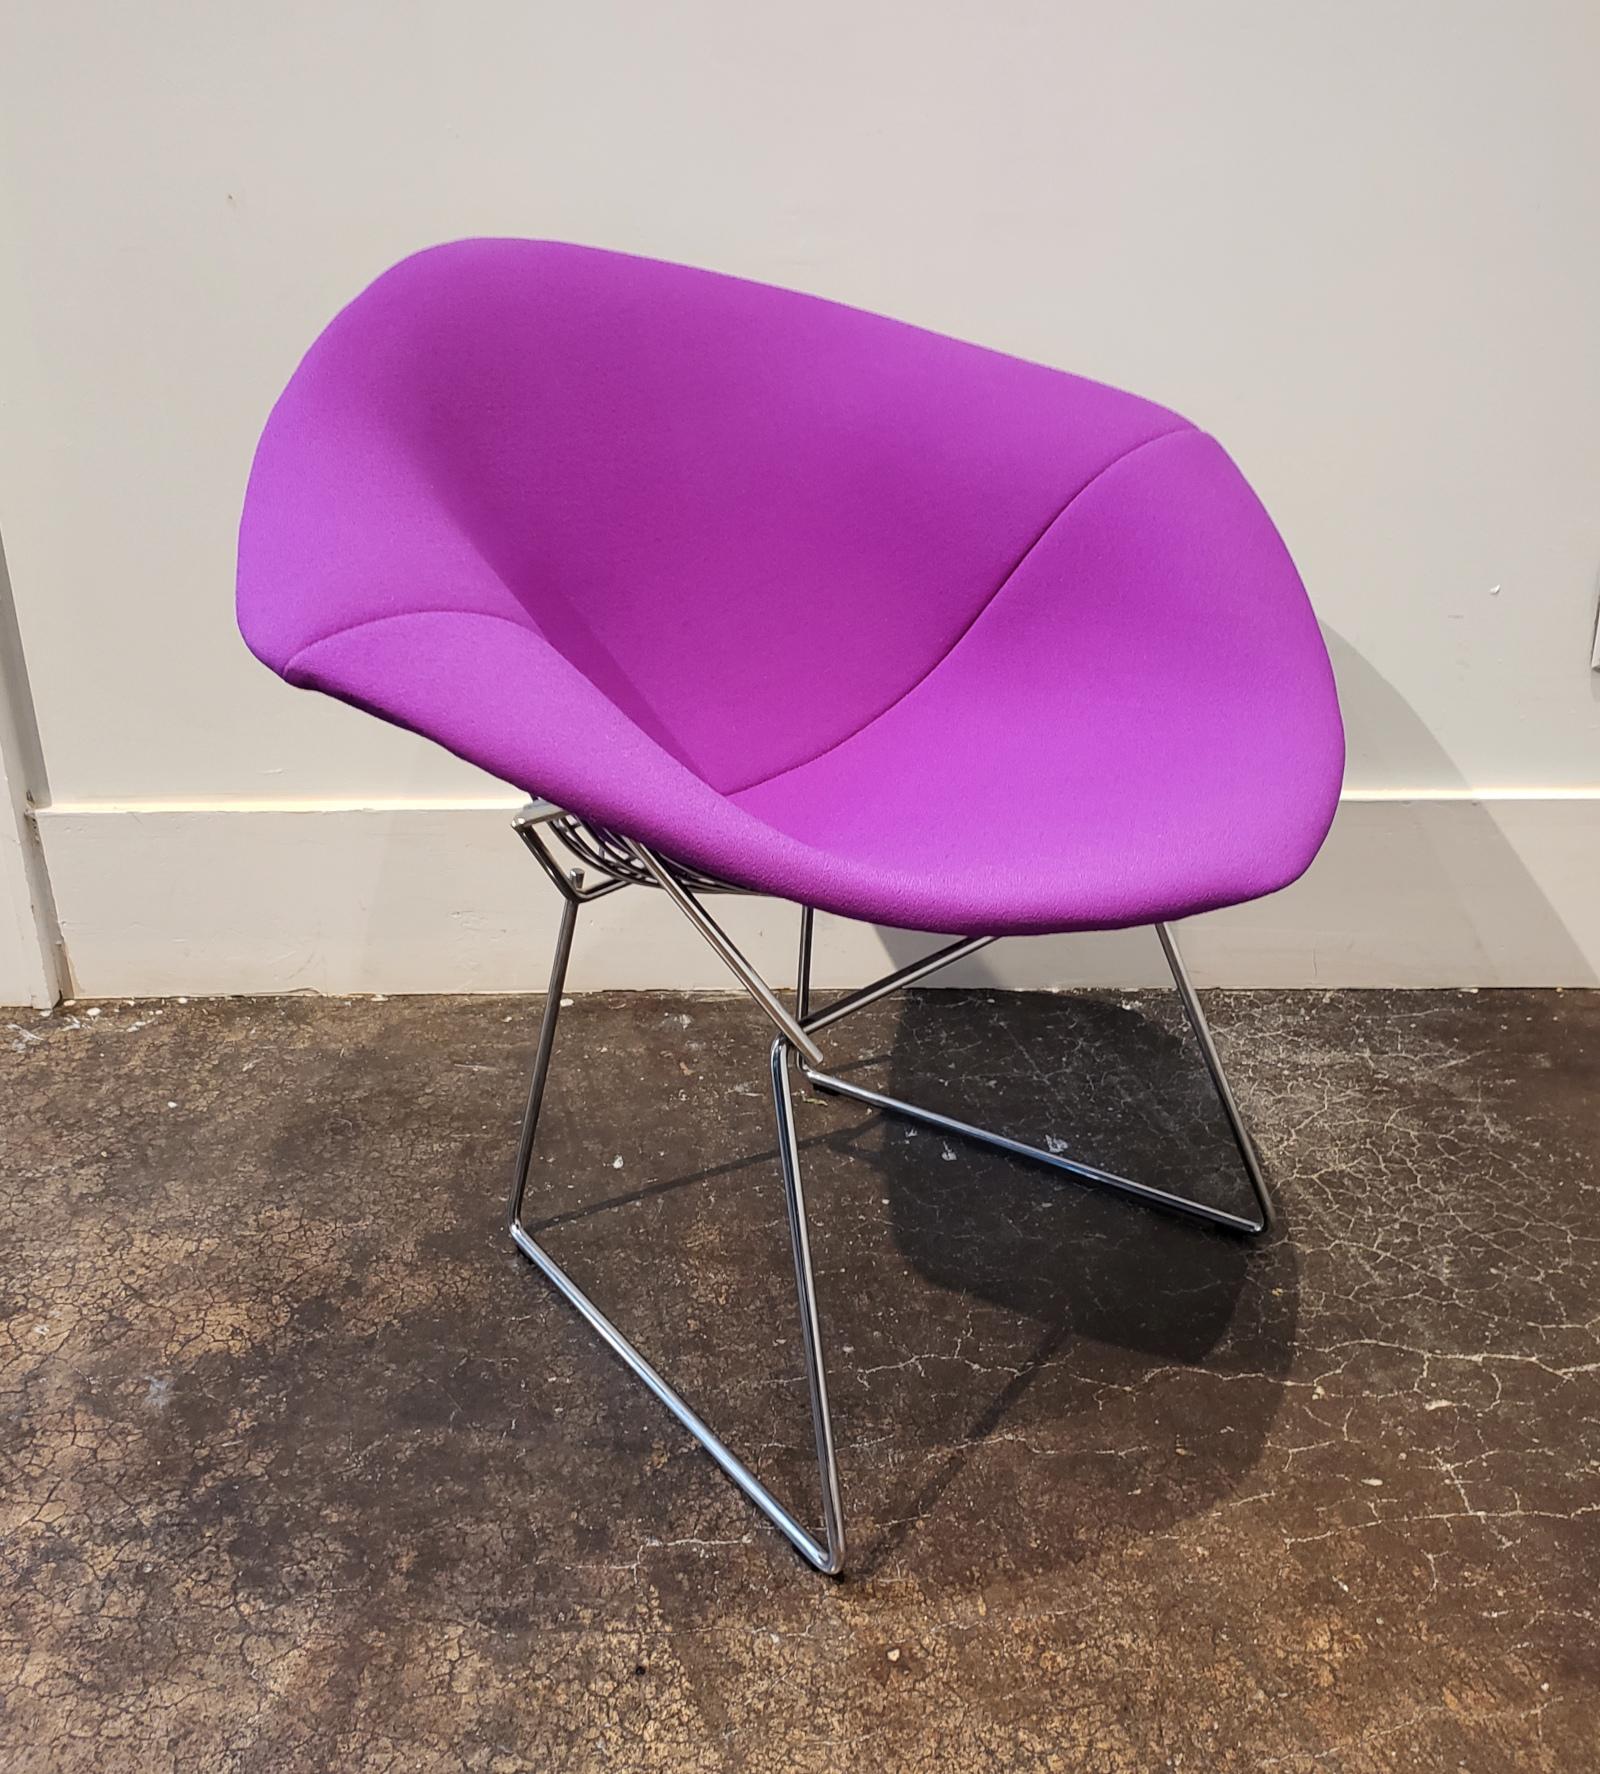 A contemporary Knoll edition Bertoia diamond chair with purple padded upholstery in metal wire frame. Sturdy, stylish and comfortable chair, circa 2000. (See fabric close-up for actual color).